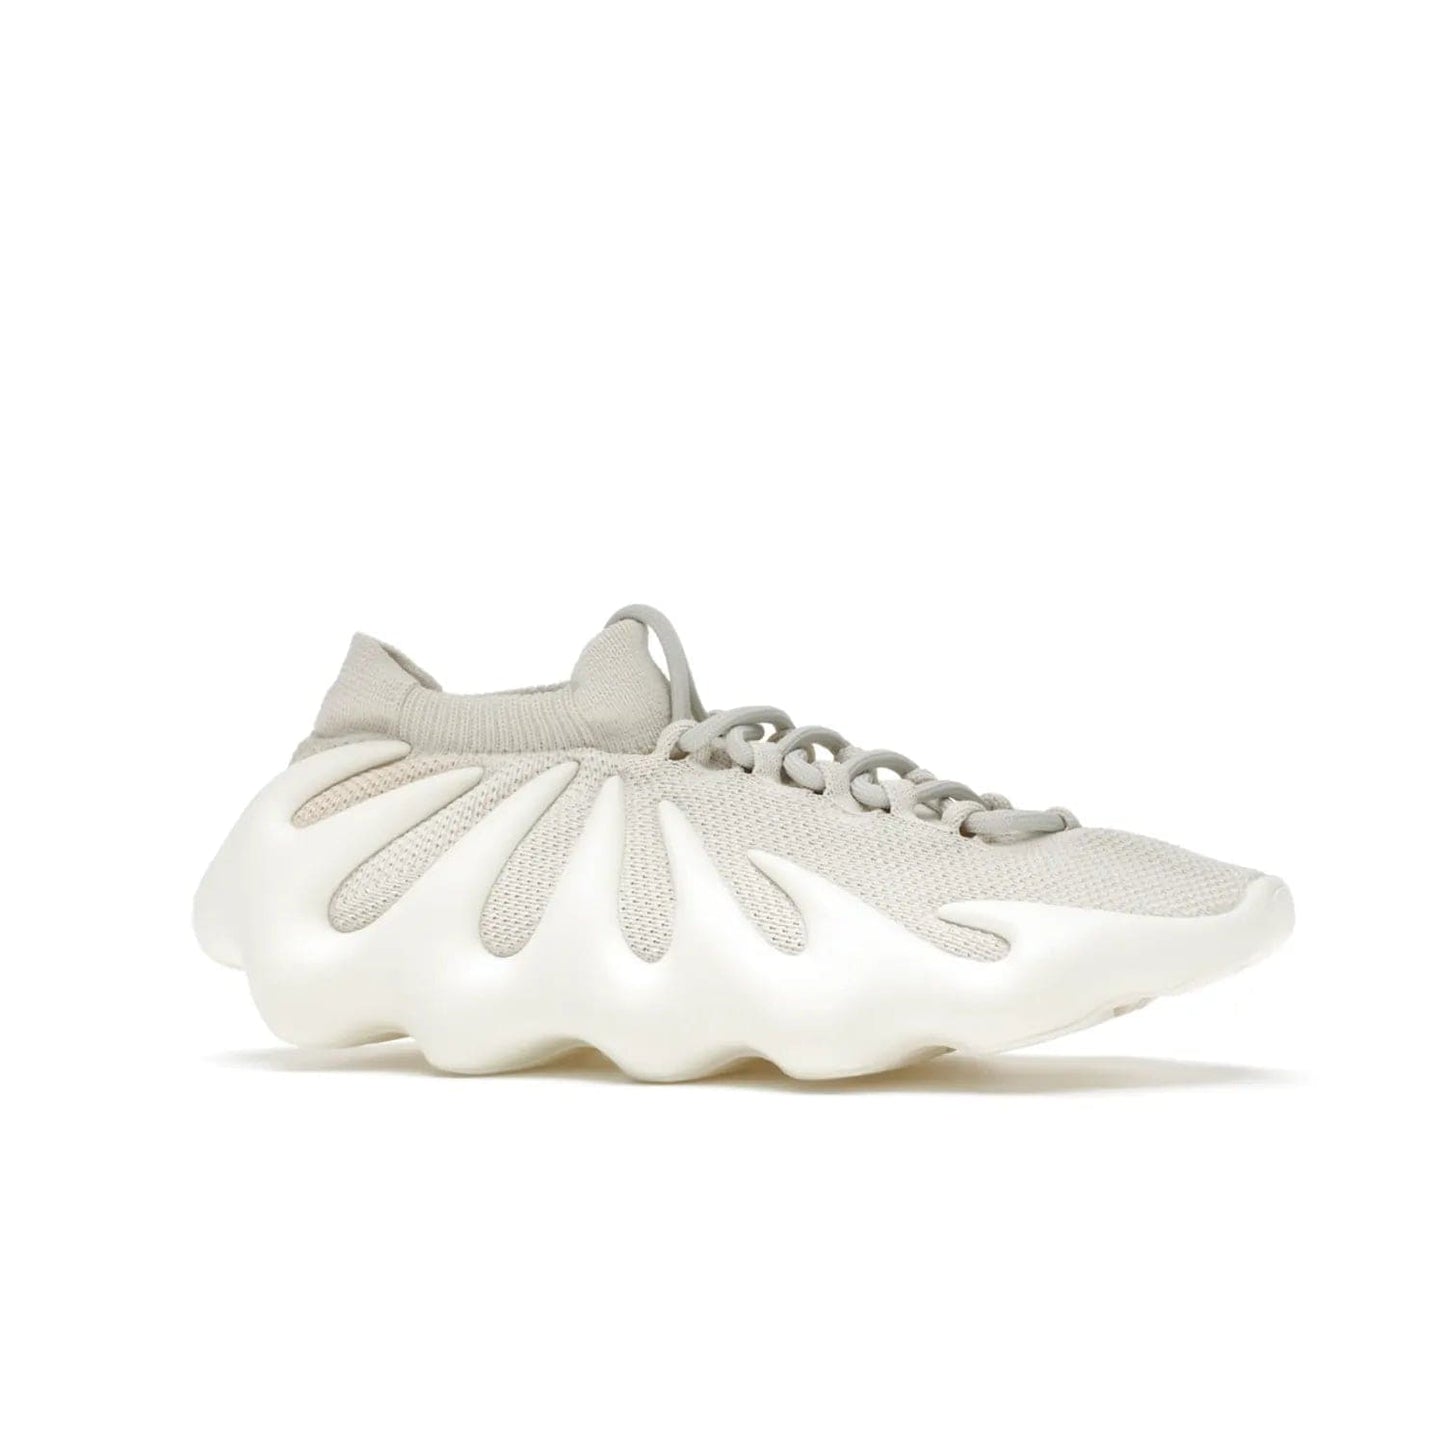 adidas Yeezy 450 Cloud White - Image 3 - Only at www.BallersClubKickz.com - Experience the future with the adidas Yeezy 450 Cloud White. A two-piece design featuring an extreme foam sole and mesh upper, this silhouette is expected to release in March 2021. Get your hands on this striking Cloud White/Cloud White colorway and stand out in the crowd.